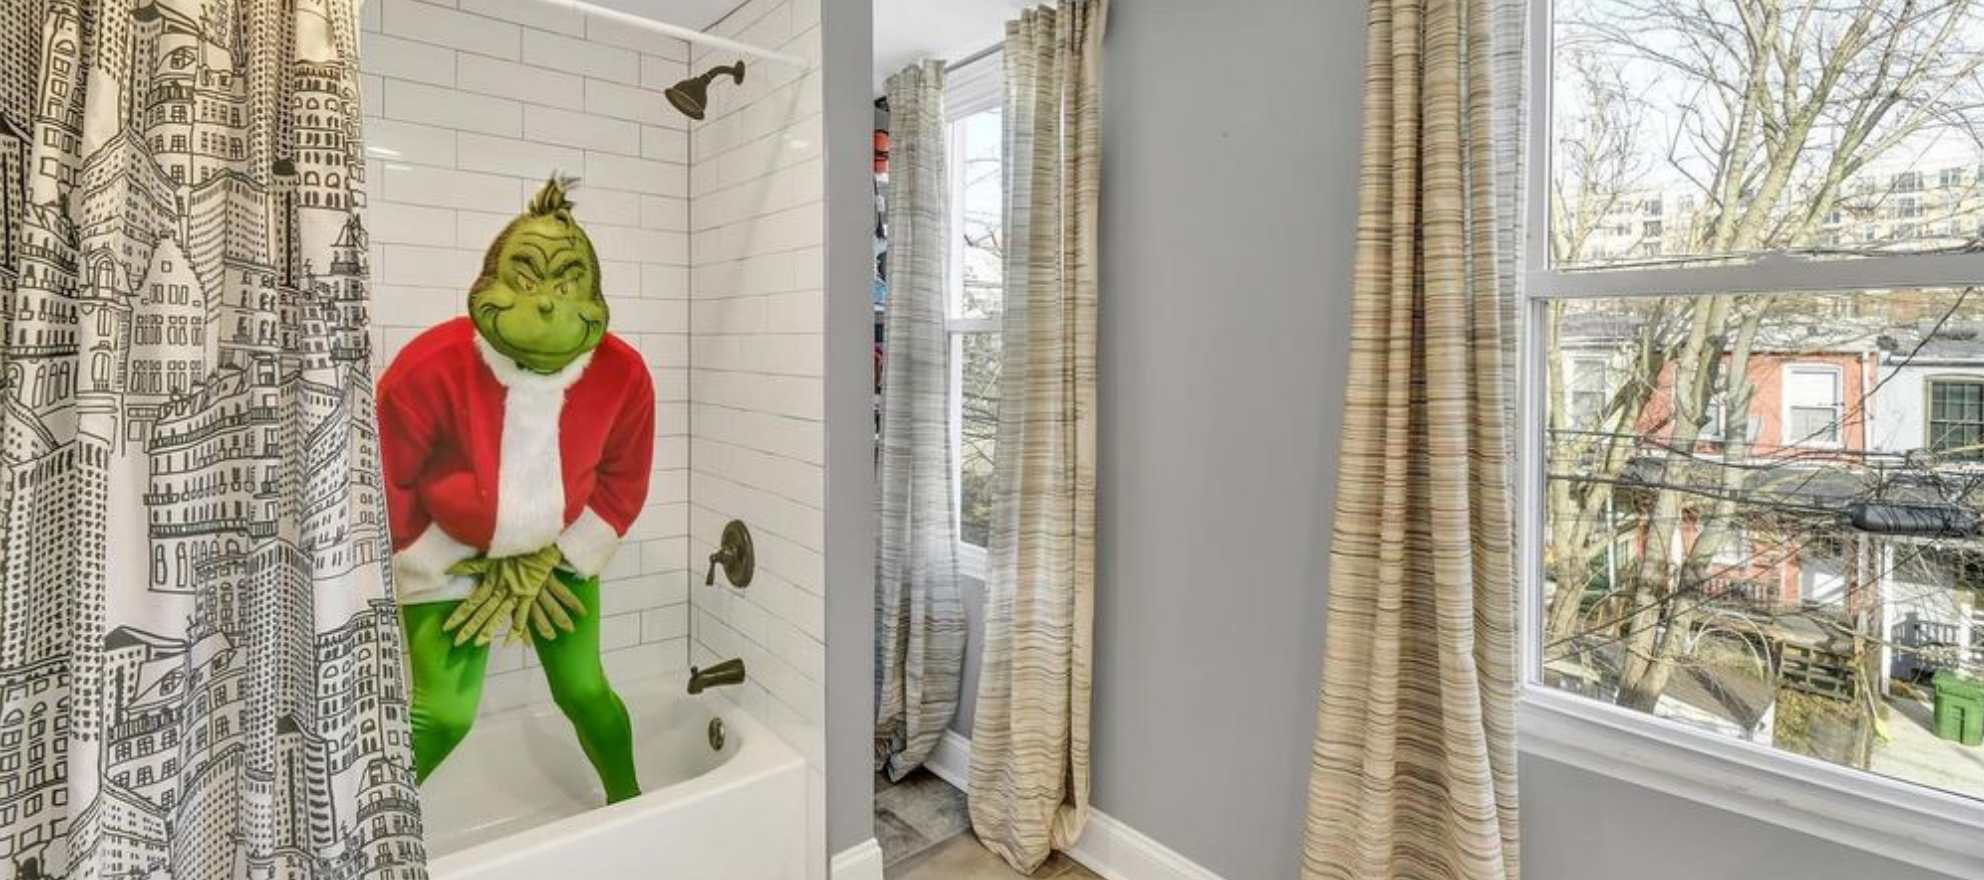 How the Grinch launched a Baltimore listing into viral fame